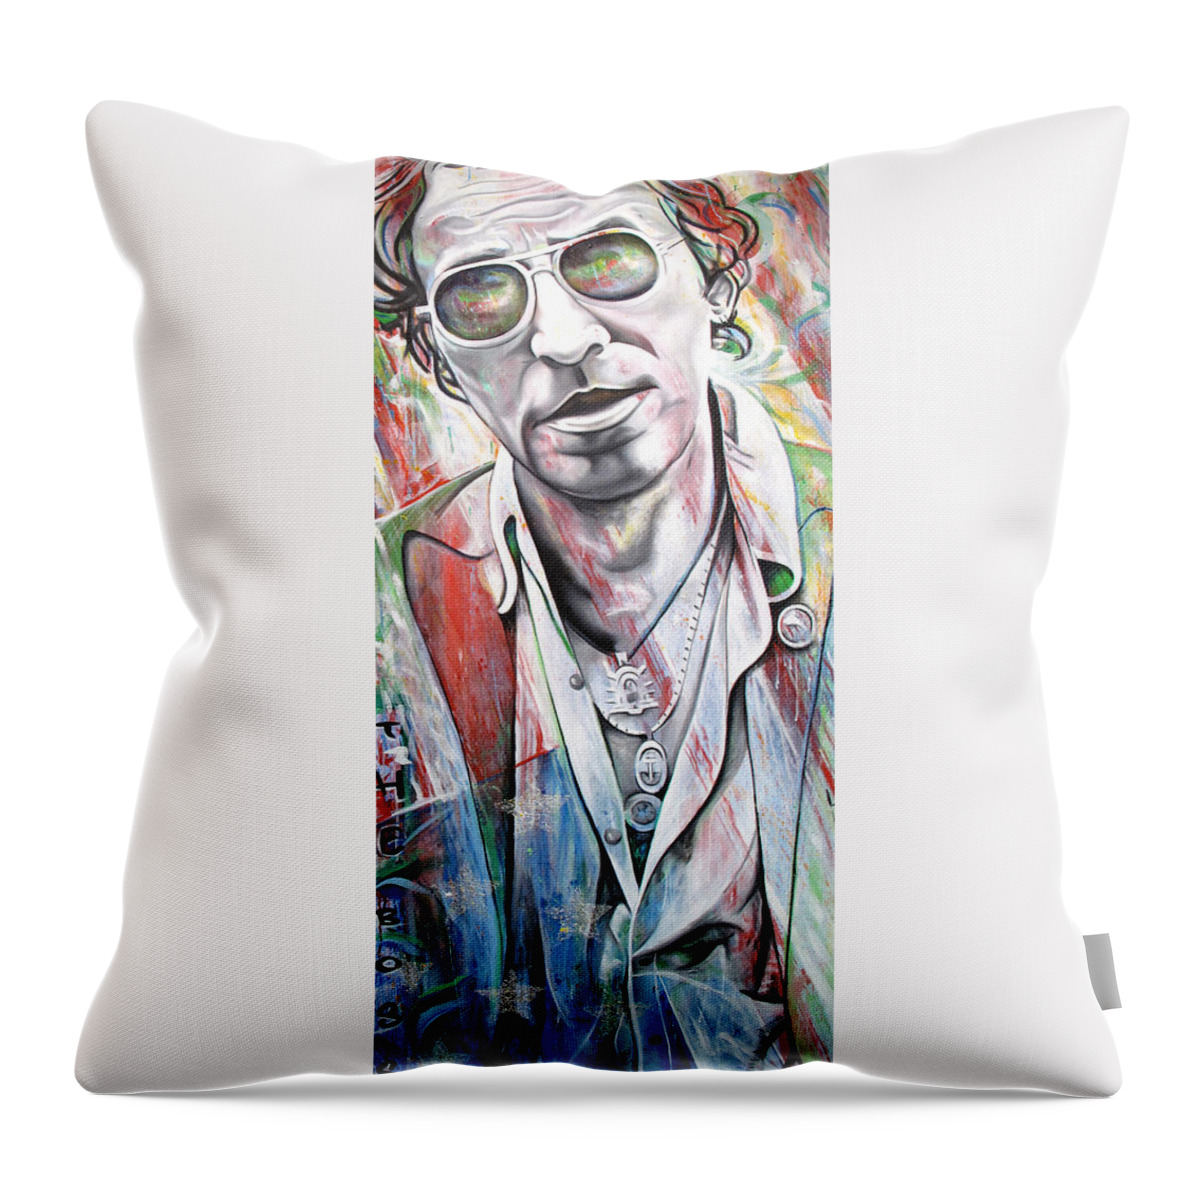 Bruce Springsteen Throw Pillow featuring the painting Bruce Springsteen by Joshua Morton